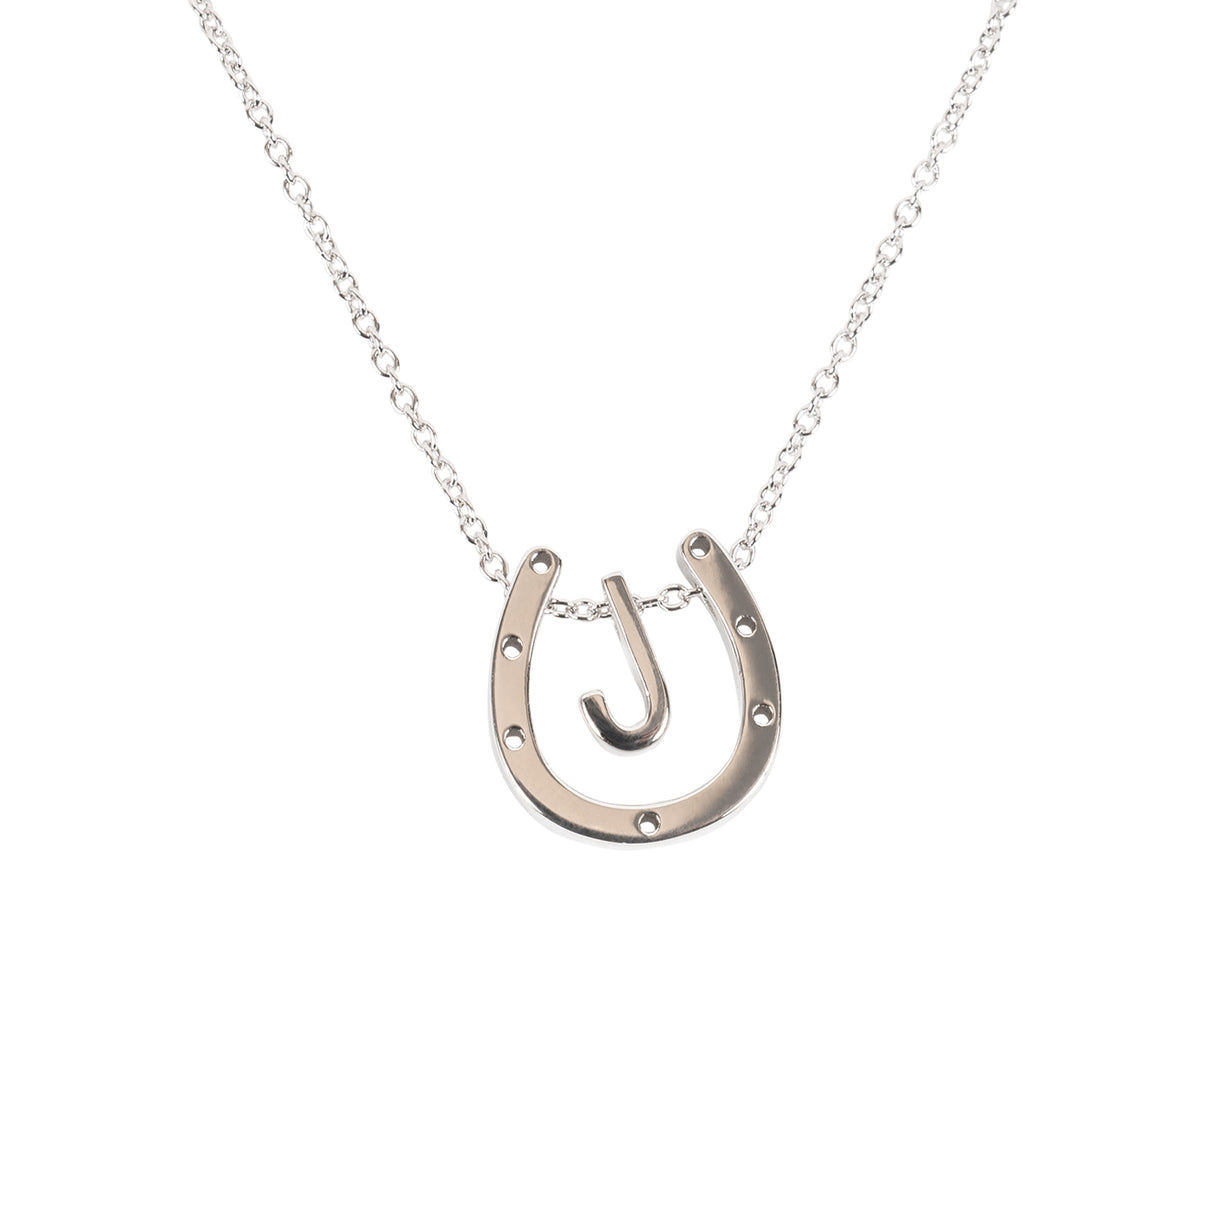 Cinto by Kelly Herd J Horseshoe Pendant Necklace